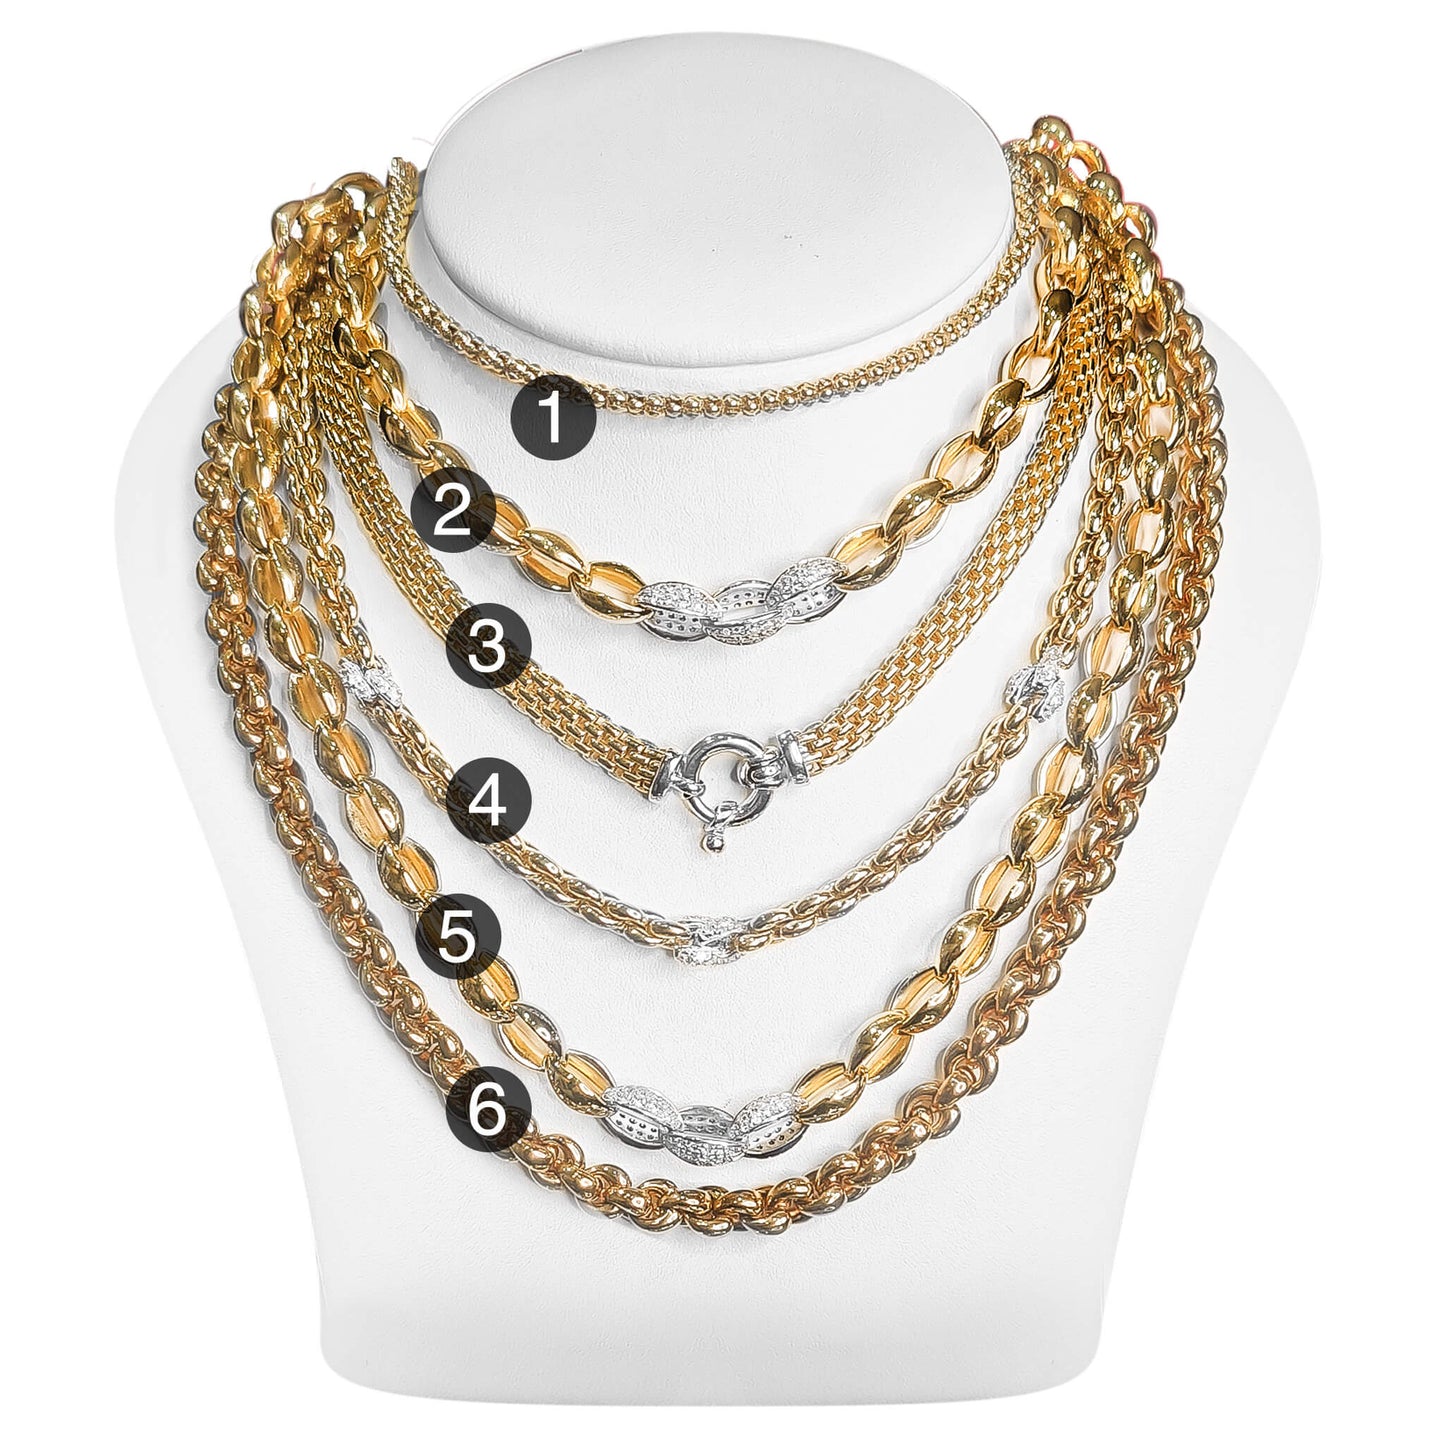 Discover our exquisite collection of Gold Plated Semi Dress Chain Sets crafted with precision and elegance. Our set features six stunning chain designs including Popple Chain, Rice Bead Chain, Grape Chain, and Heart Link Chain. Each chain is made with high-quality 925 Sterling Silver and comes in various sizes ranging from 40cm to 45cm. Elevate your style and add a touch of sophistication with these beautifully crafted gold plated chains. Shop now and indulge in the timeless allure of gold and silver.